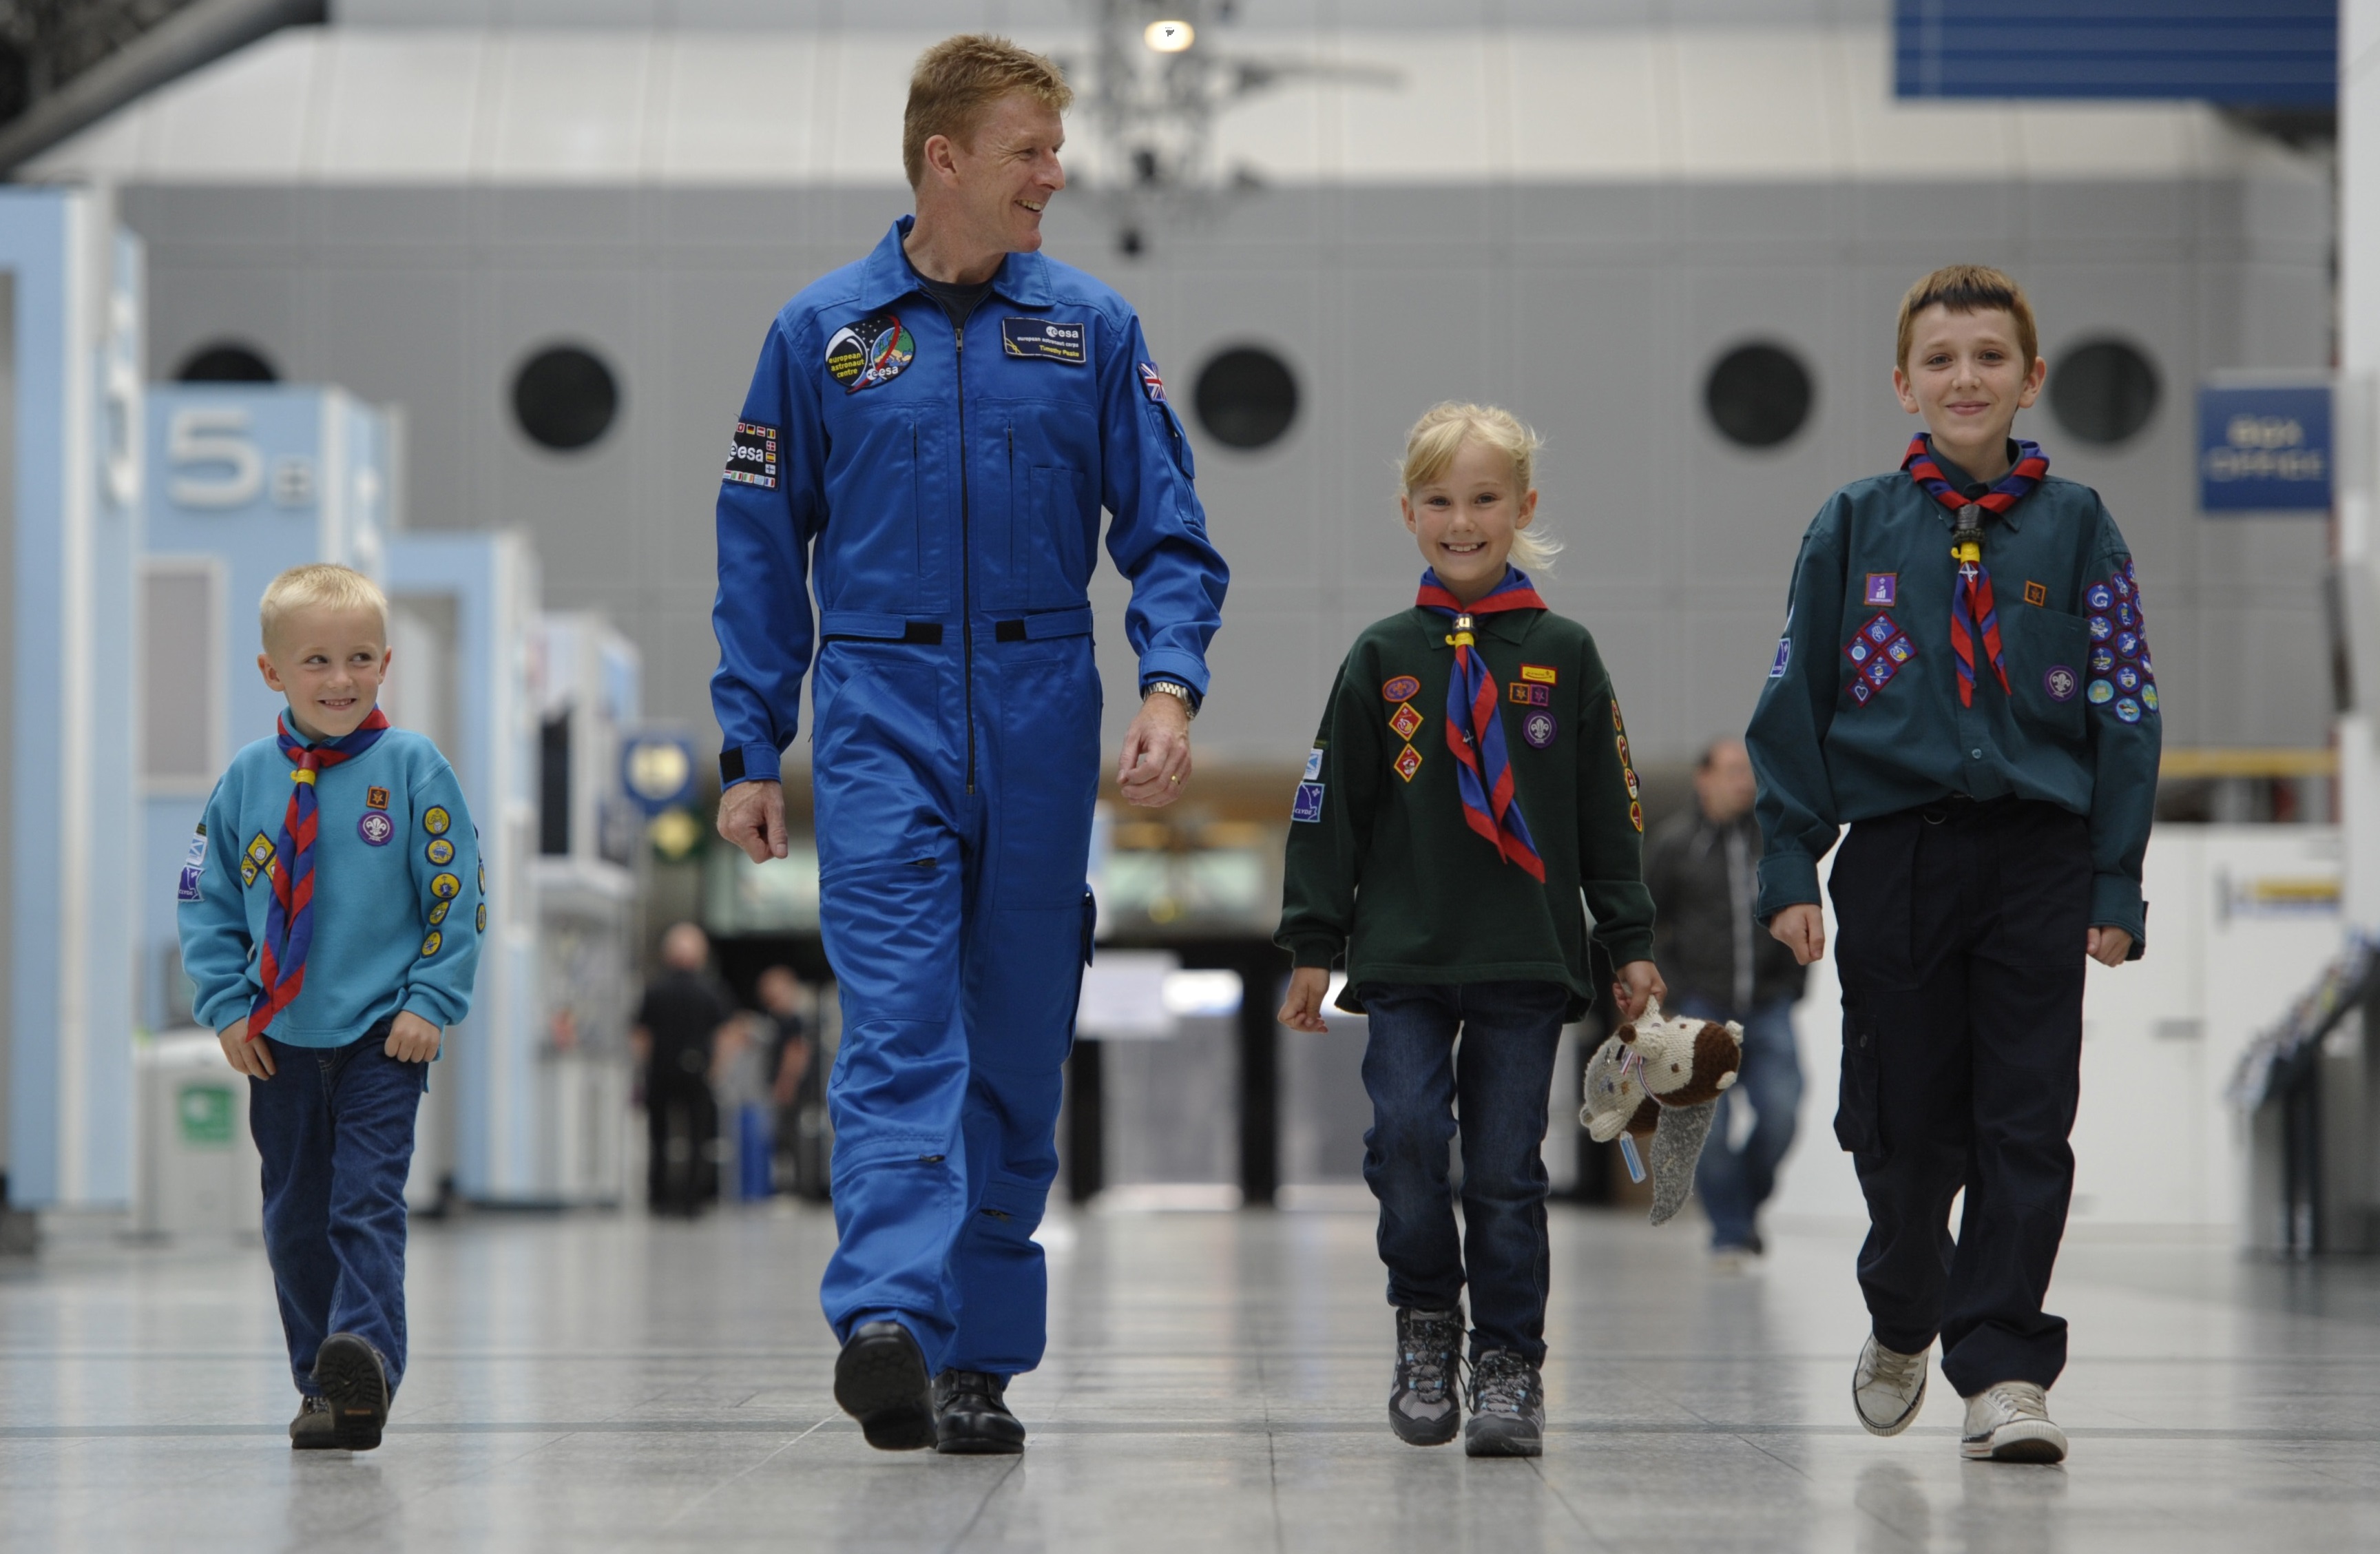 Major Tim hopes to encourage young explorers to carry on the space travel legacy.